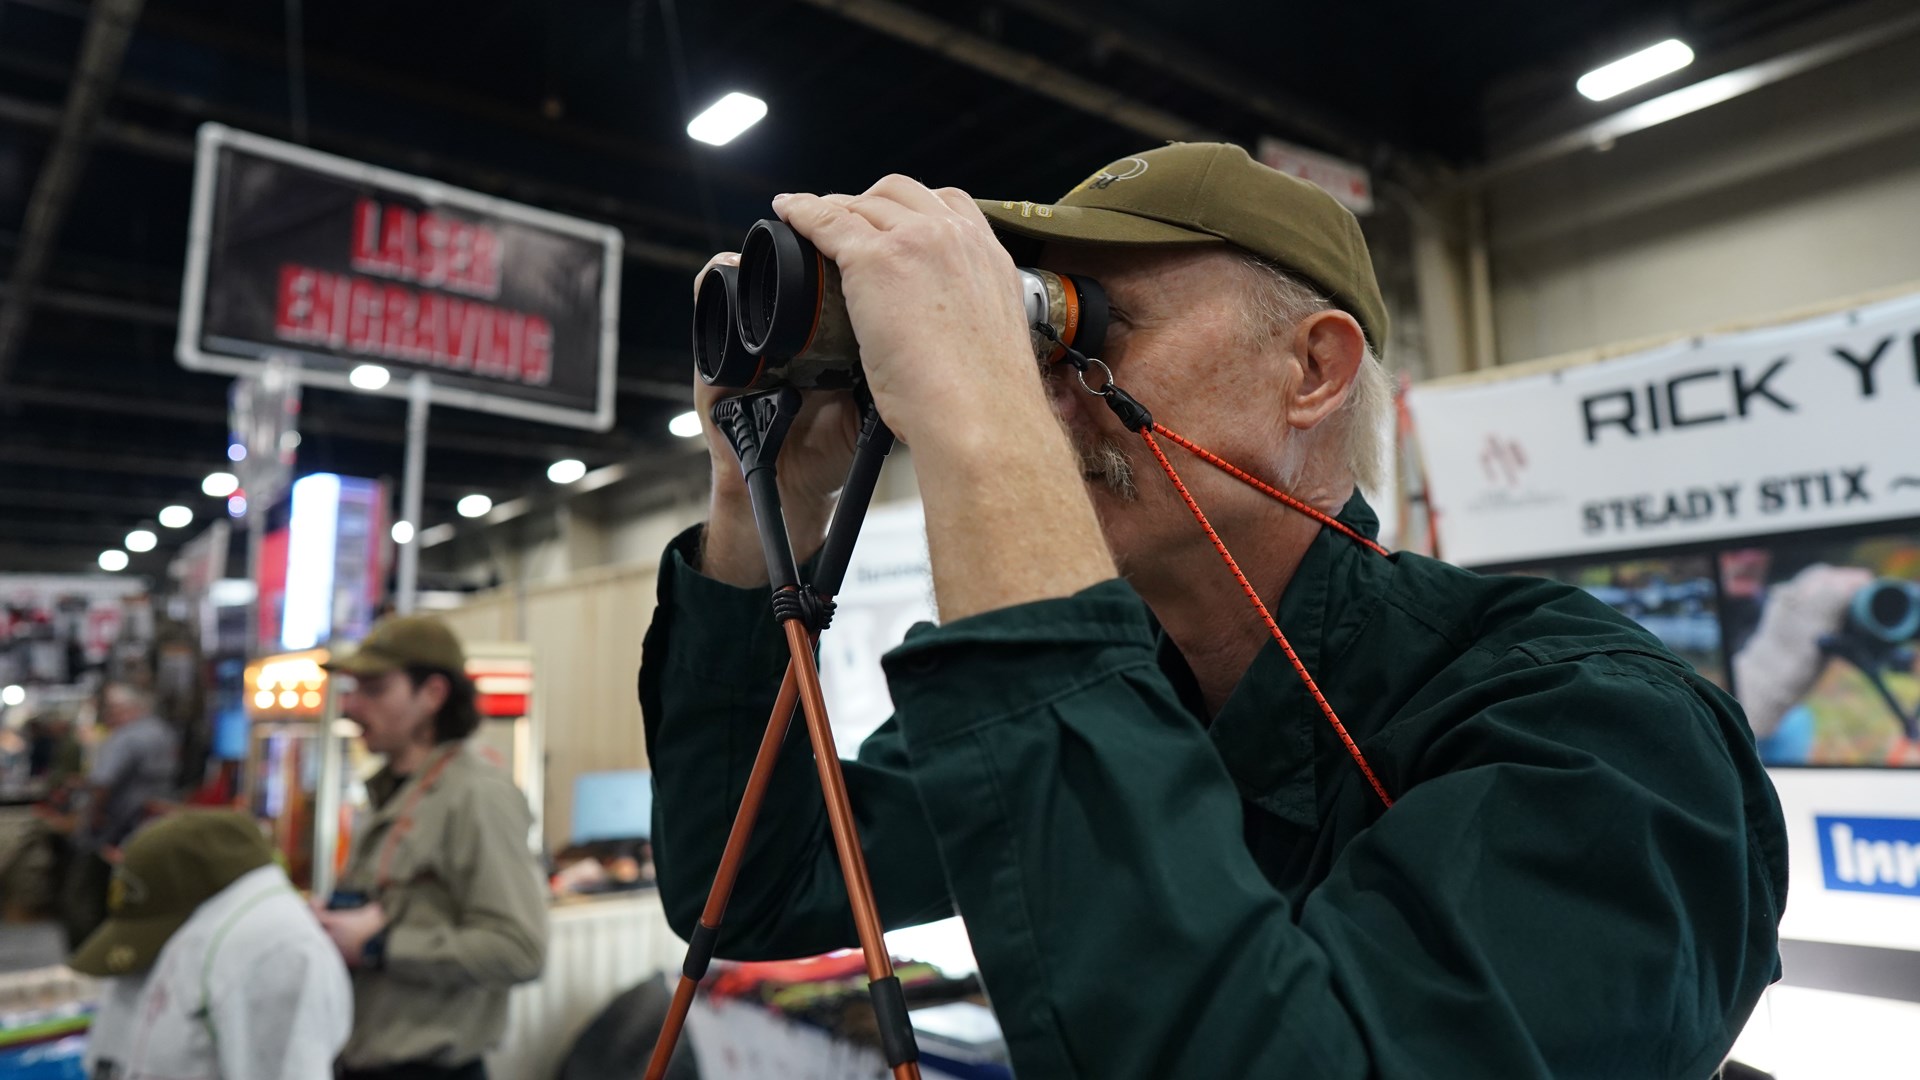 rick young outdoors steady stix in use trade show man with binos